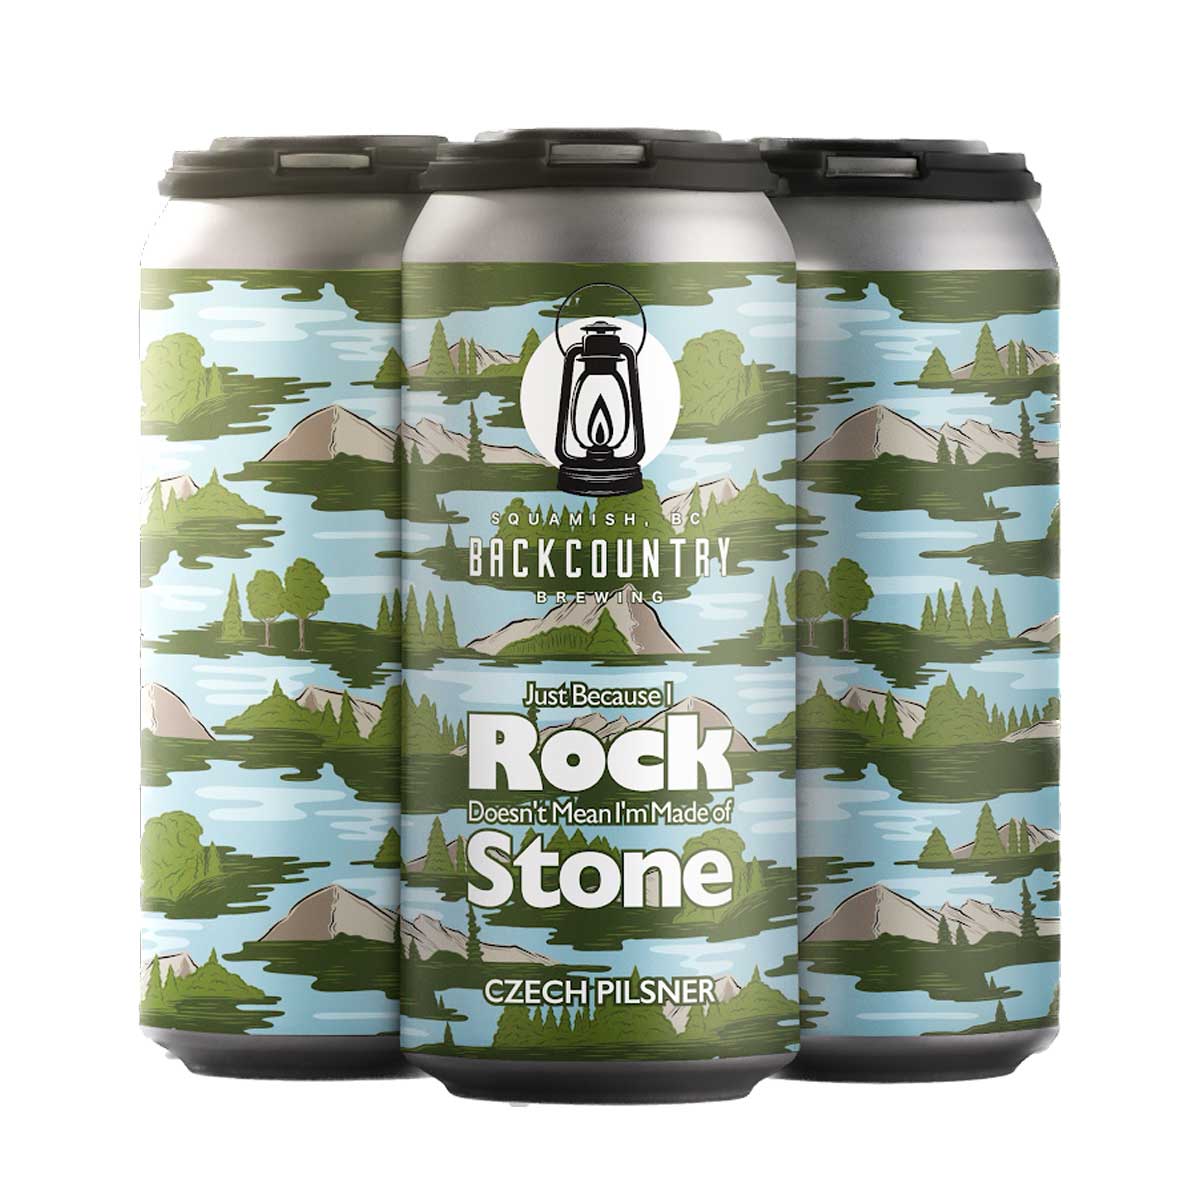 TAG Liquor Stores BC - Backcountry Brewing "Just because I rock doesn't mean I am made out of stone" Czech Pilsner 4 Pack Cans